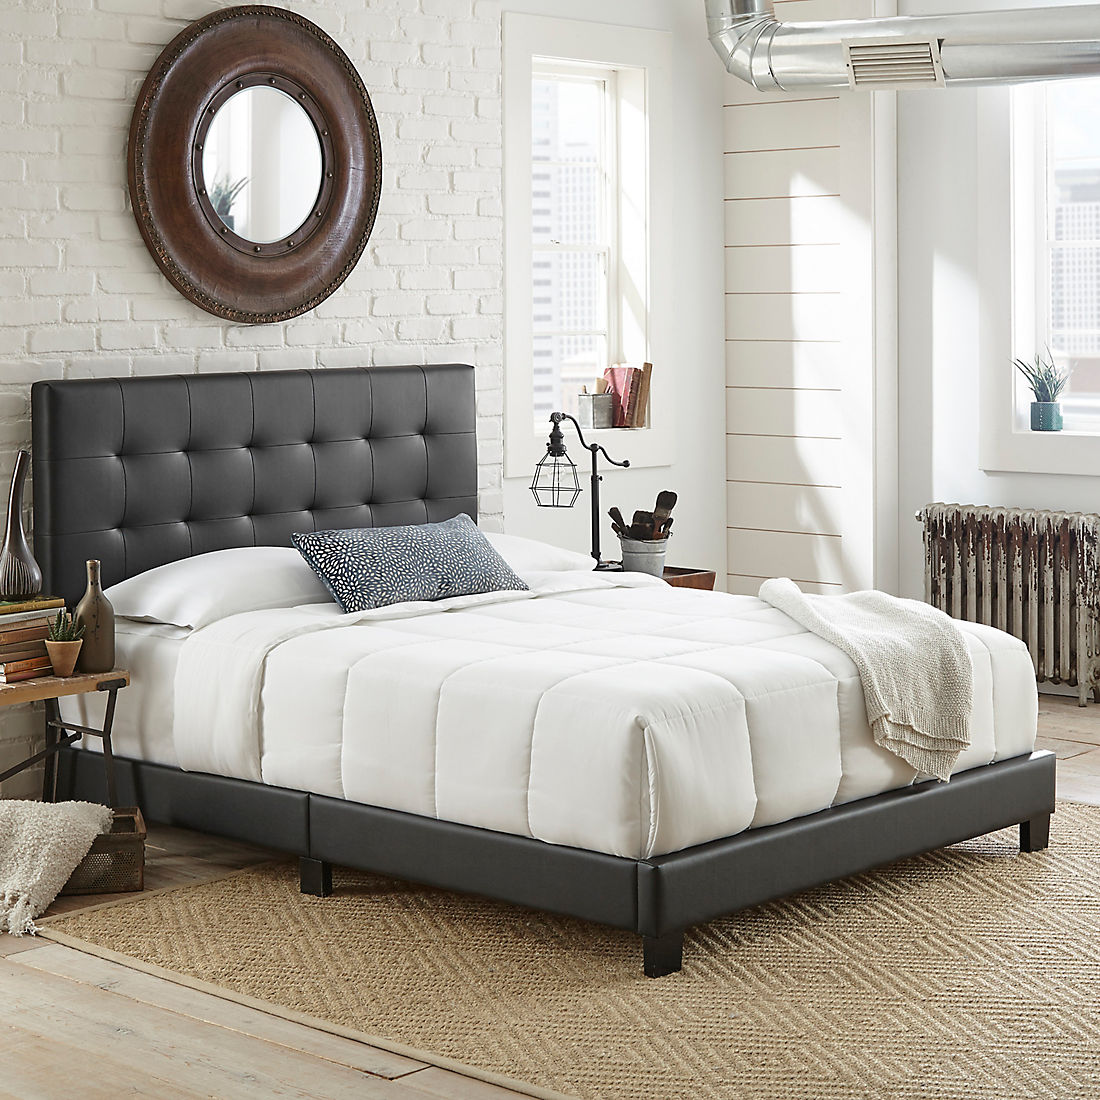 Contour Rest Michal Full Size Simulated, Leather Platform Bed Frame